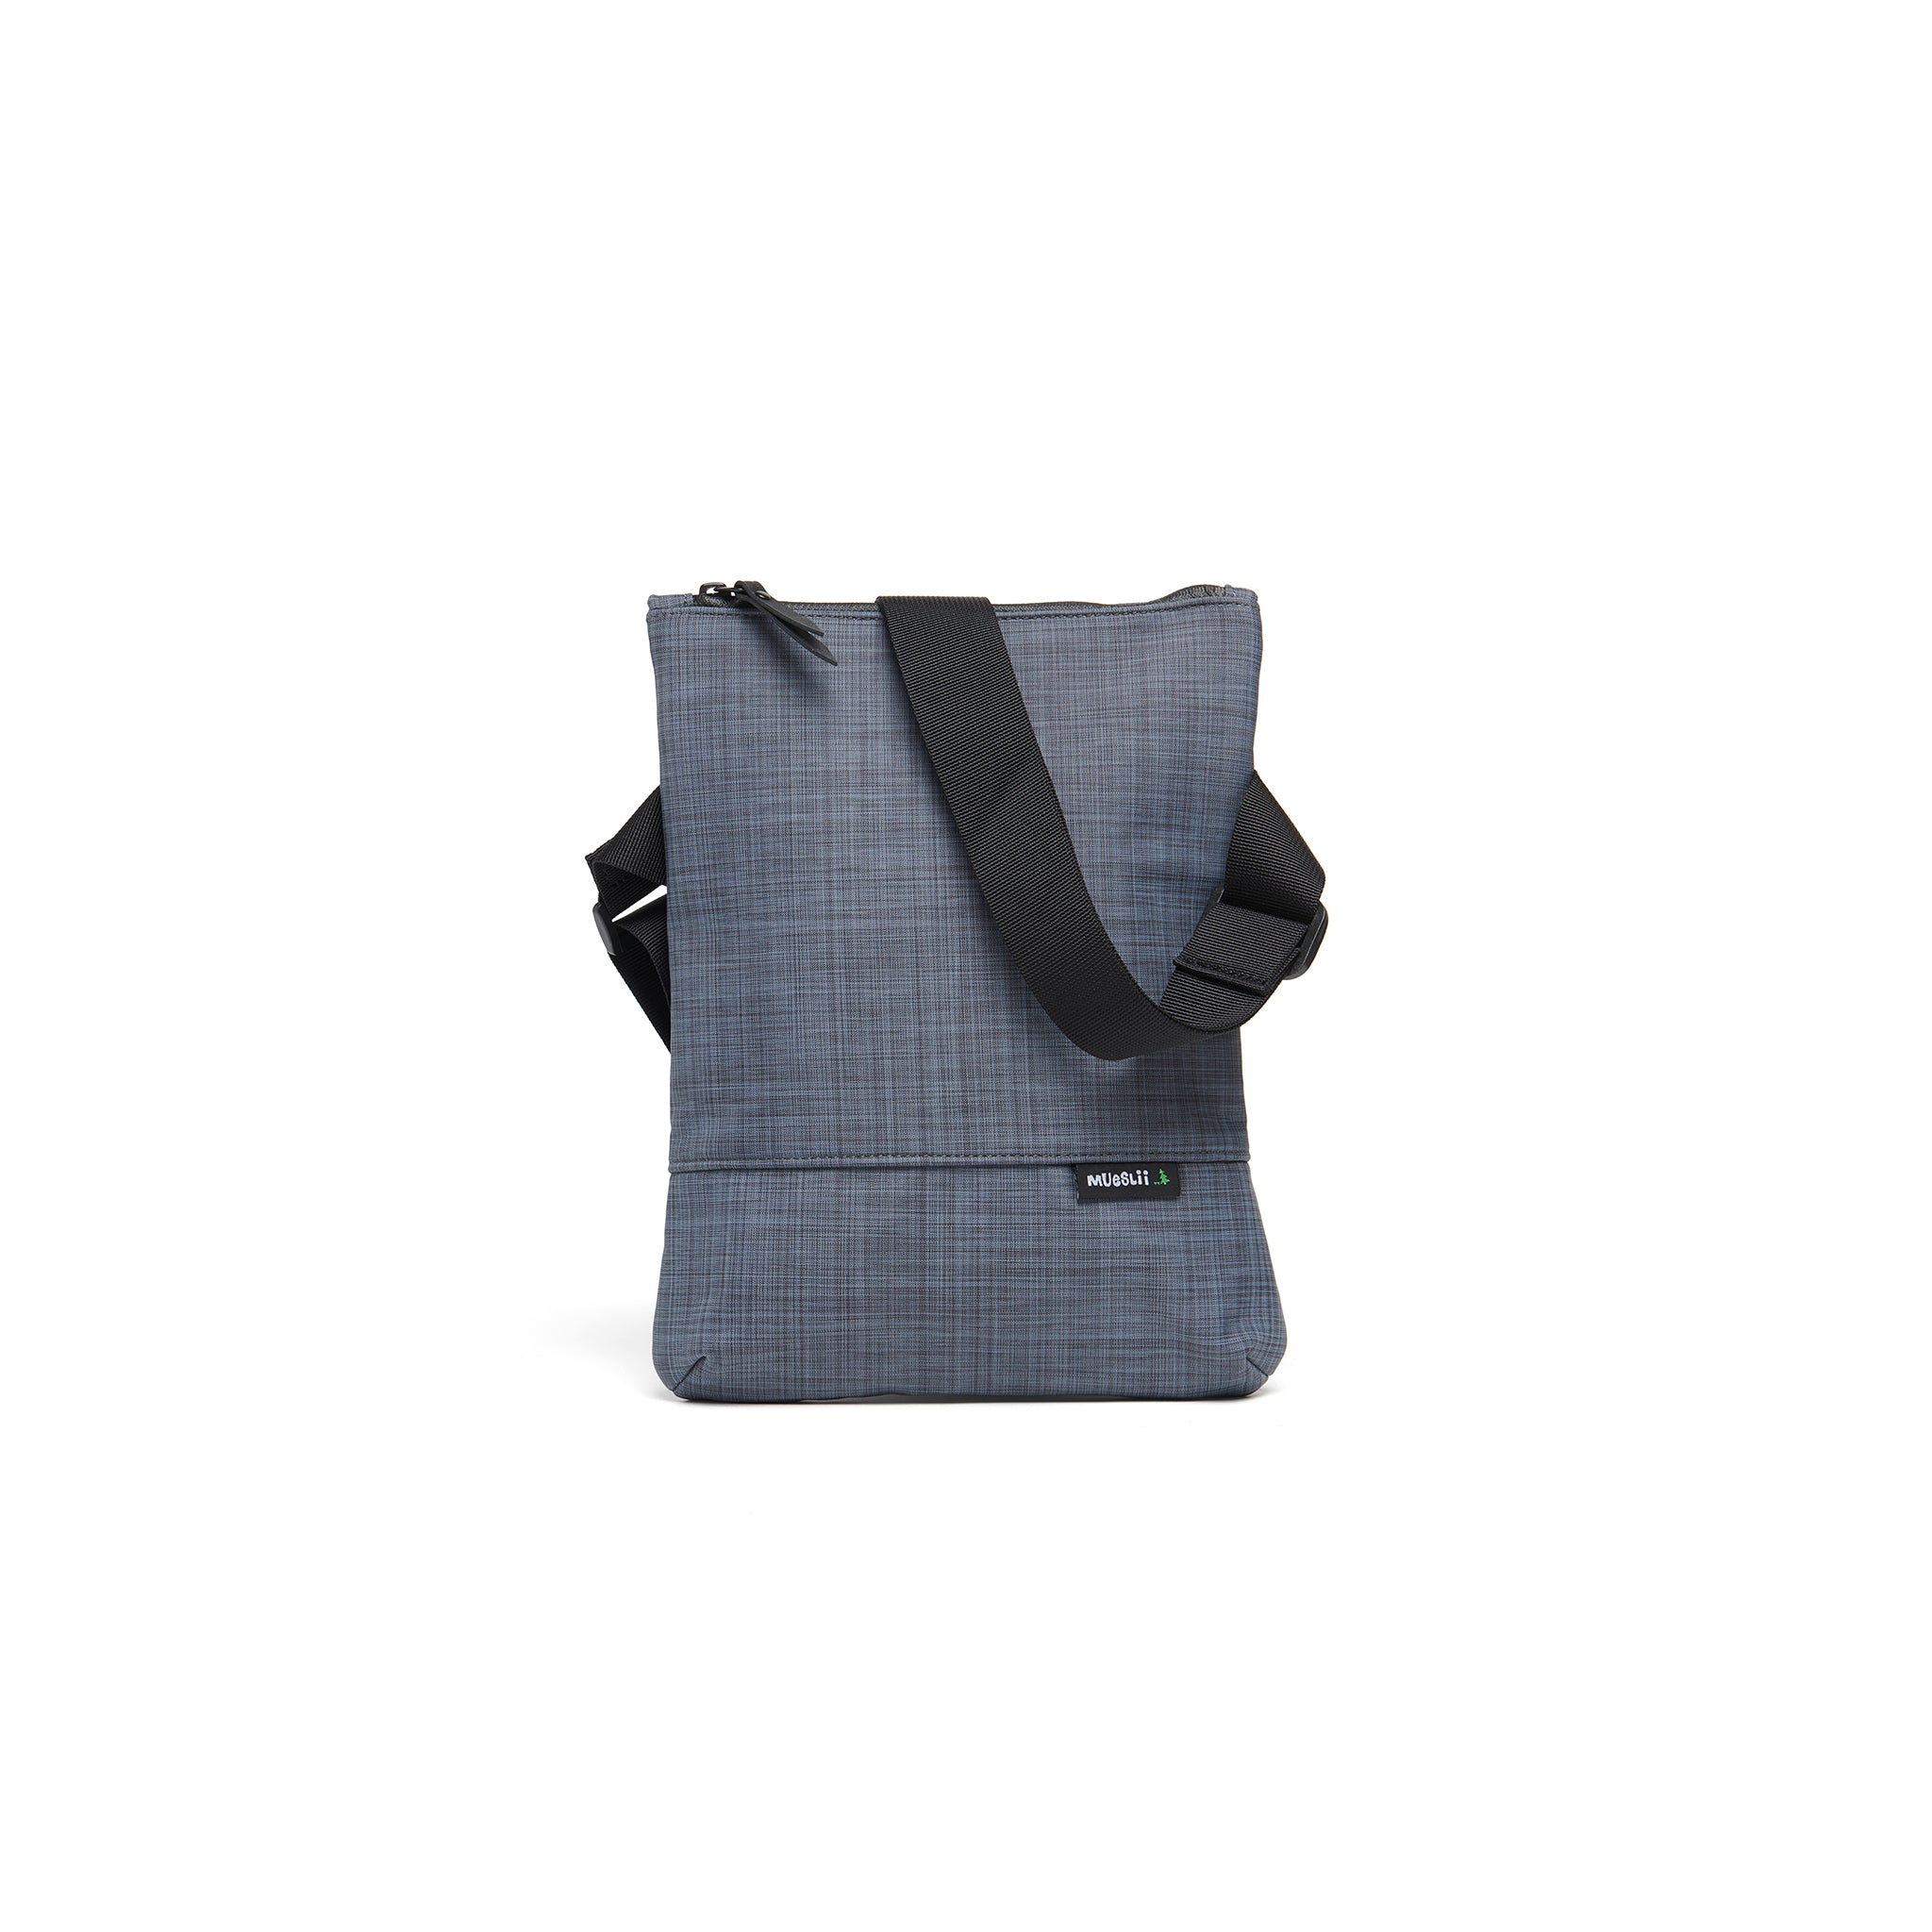 Mueslii crossbody,  made of water resistant canvas nylon, color slate grey, front view.